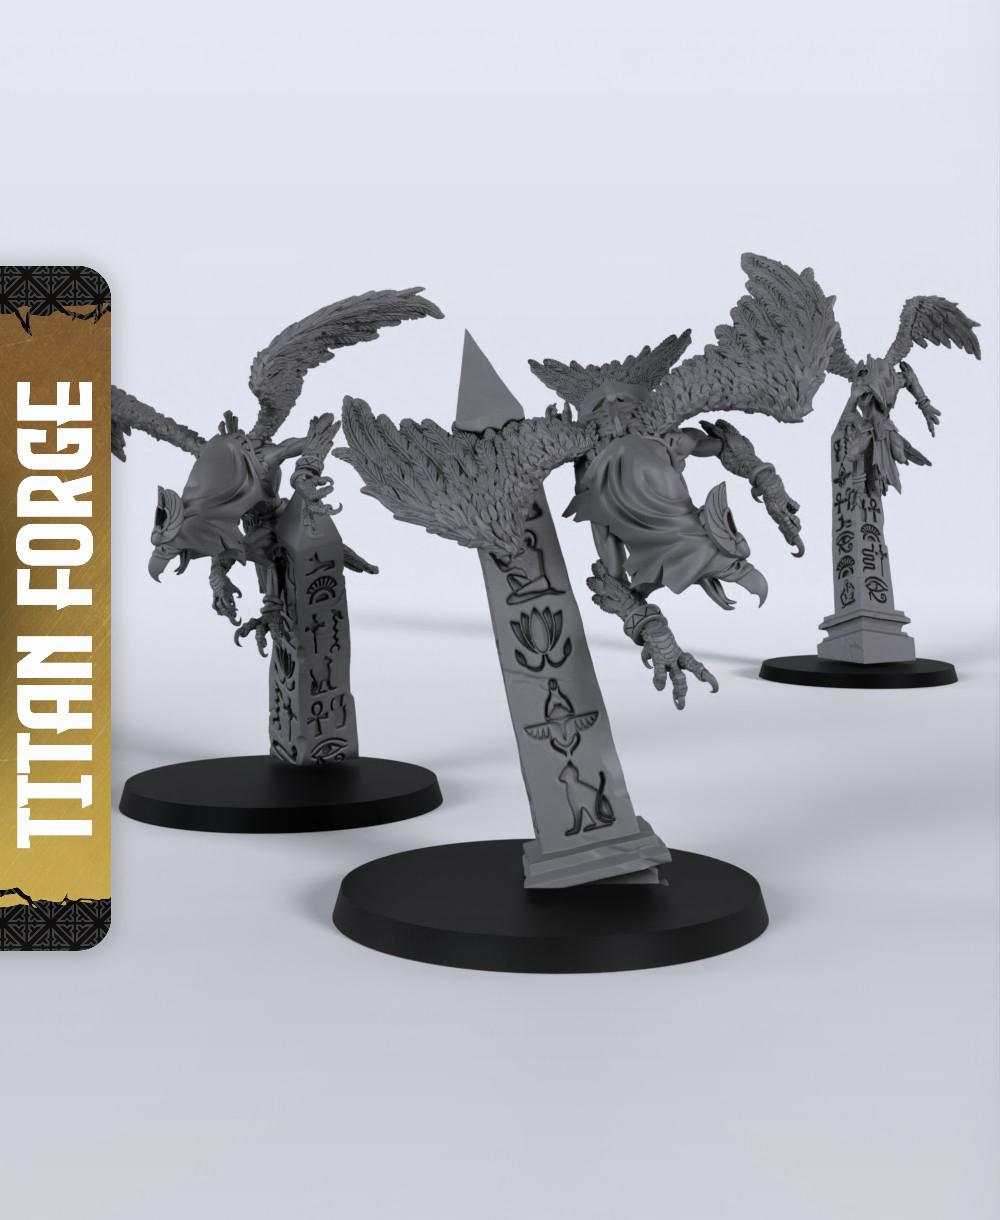 Vultures - With Free Dragon Warhammer - 5e DnD Inspired for RPG and Wargamers 3d model